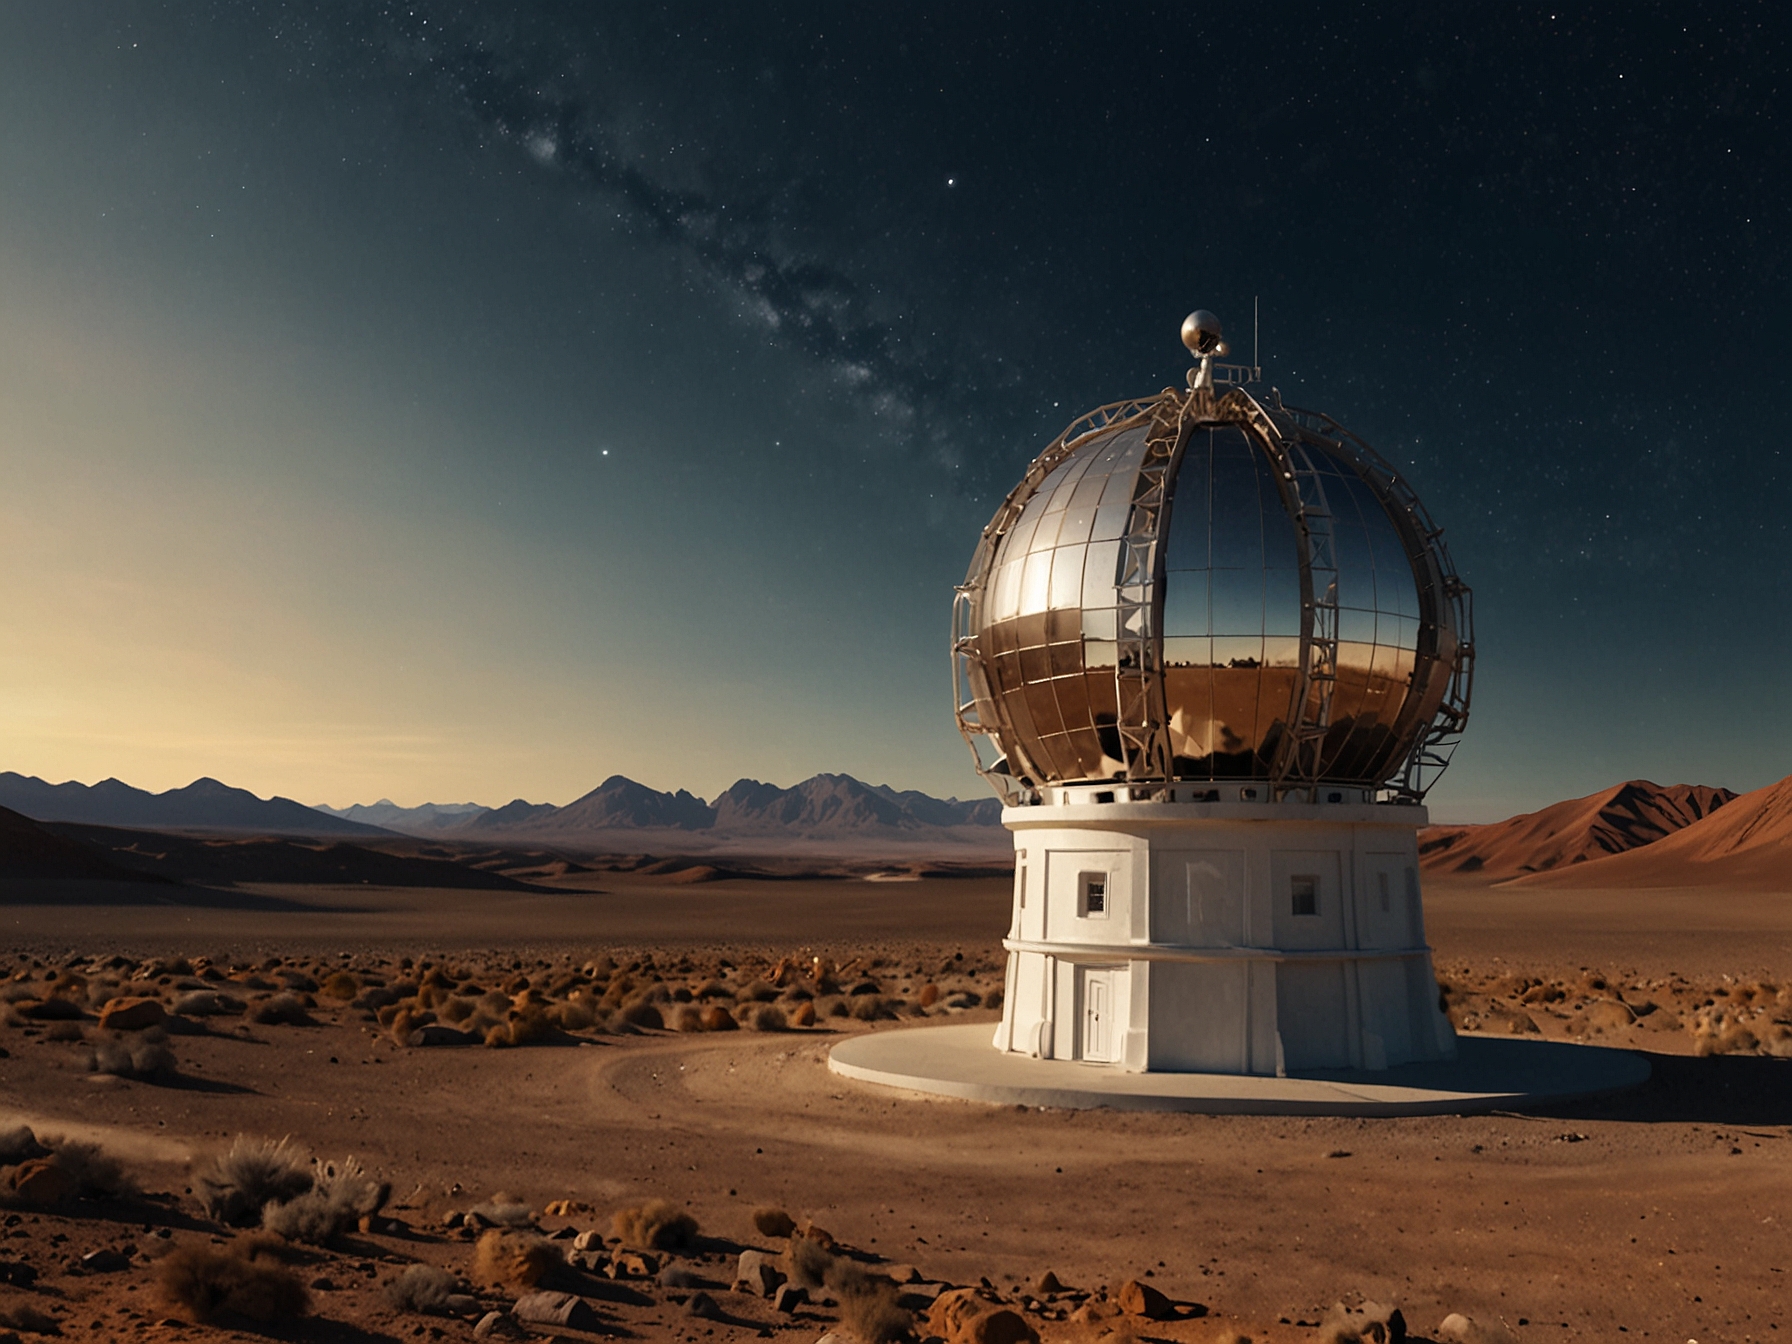 A panoramic view of the Simons Observatory located in the arid expanses of Chile's Atacama Desert, highlighting its advanced telescopic instruments under clear skies optimal for astronomical observations.